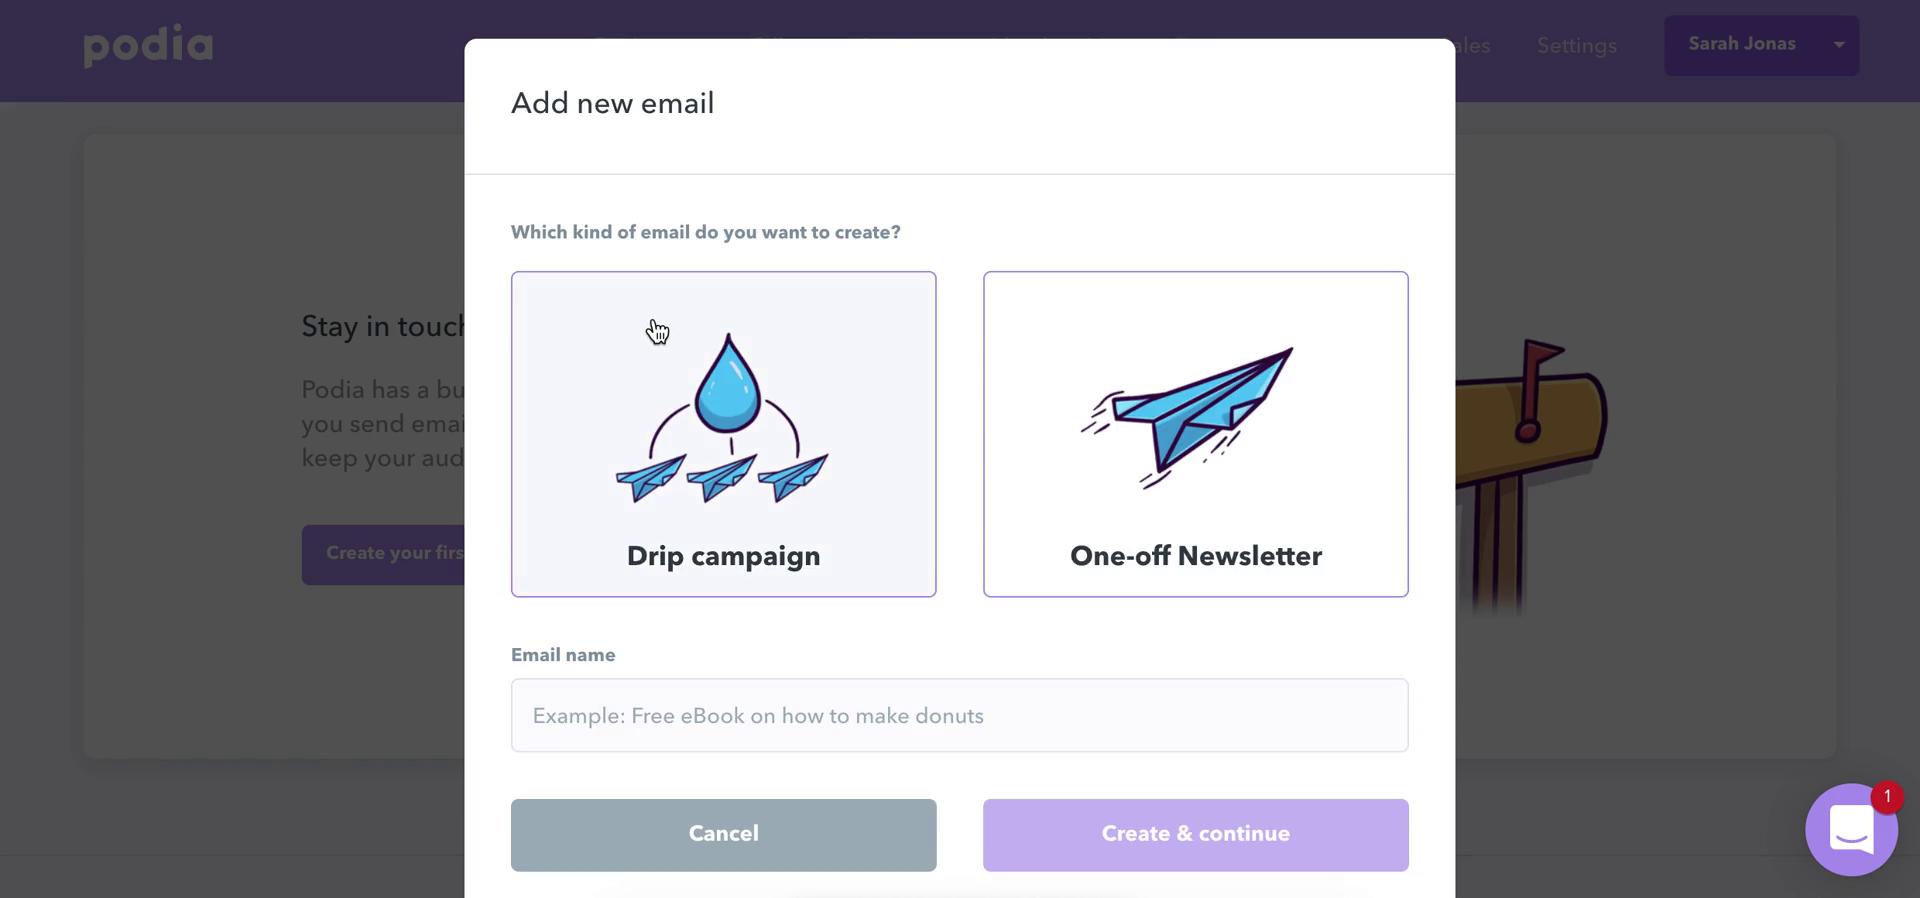 Screenshot of Select campaign type on Creating an email campaign on Podia user flow